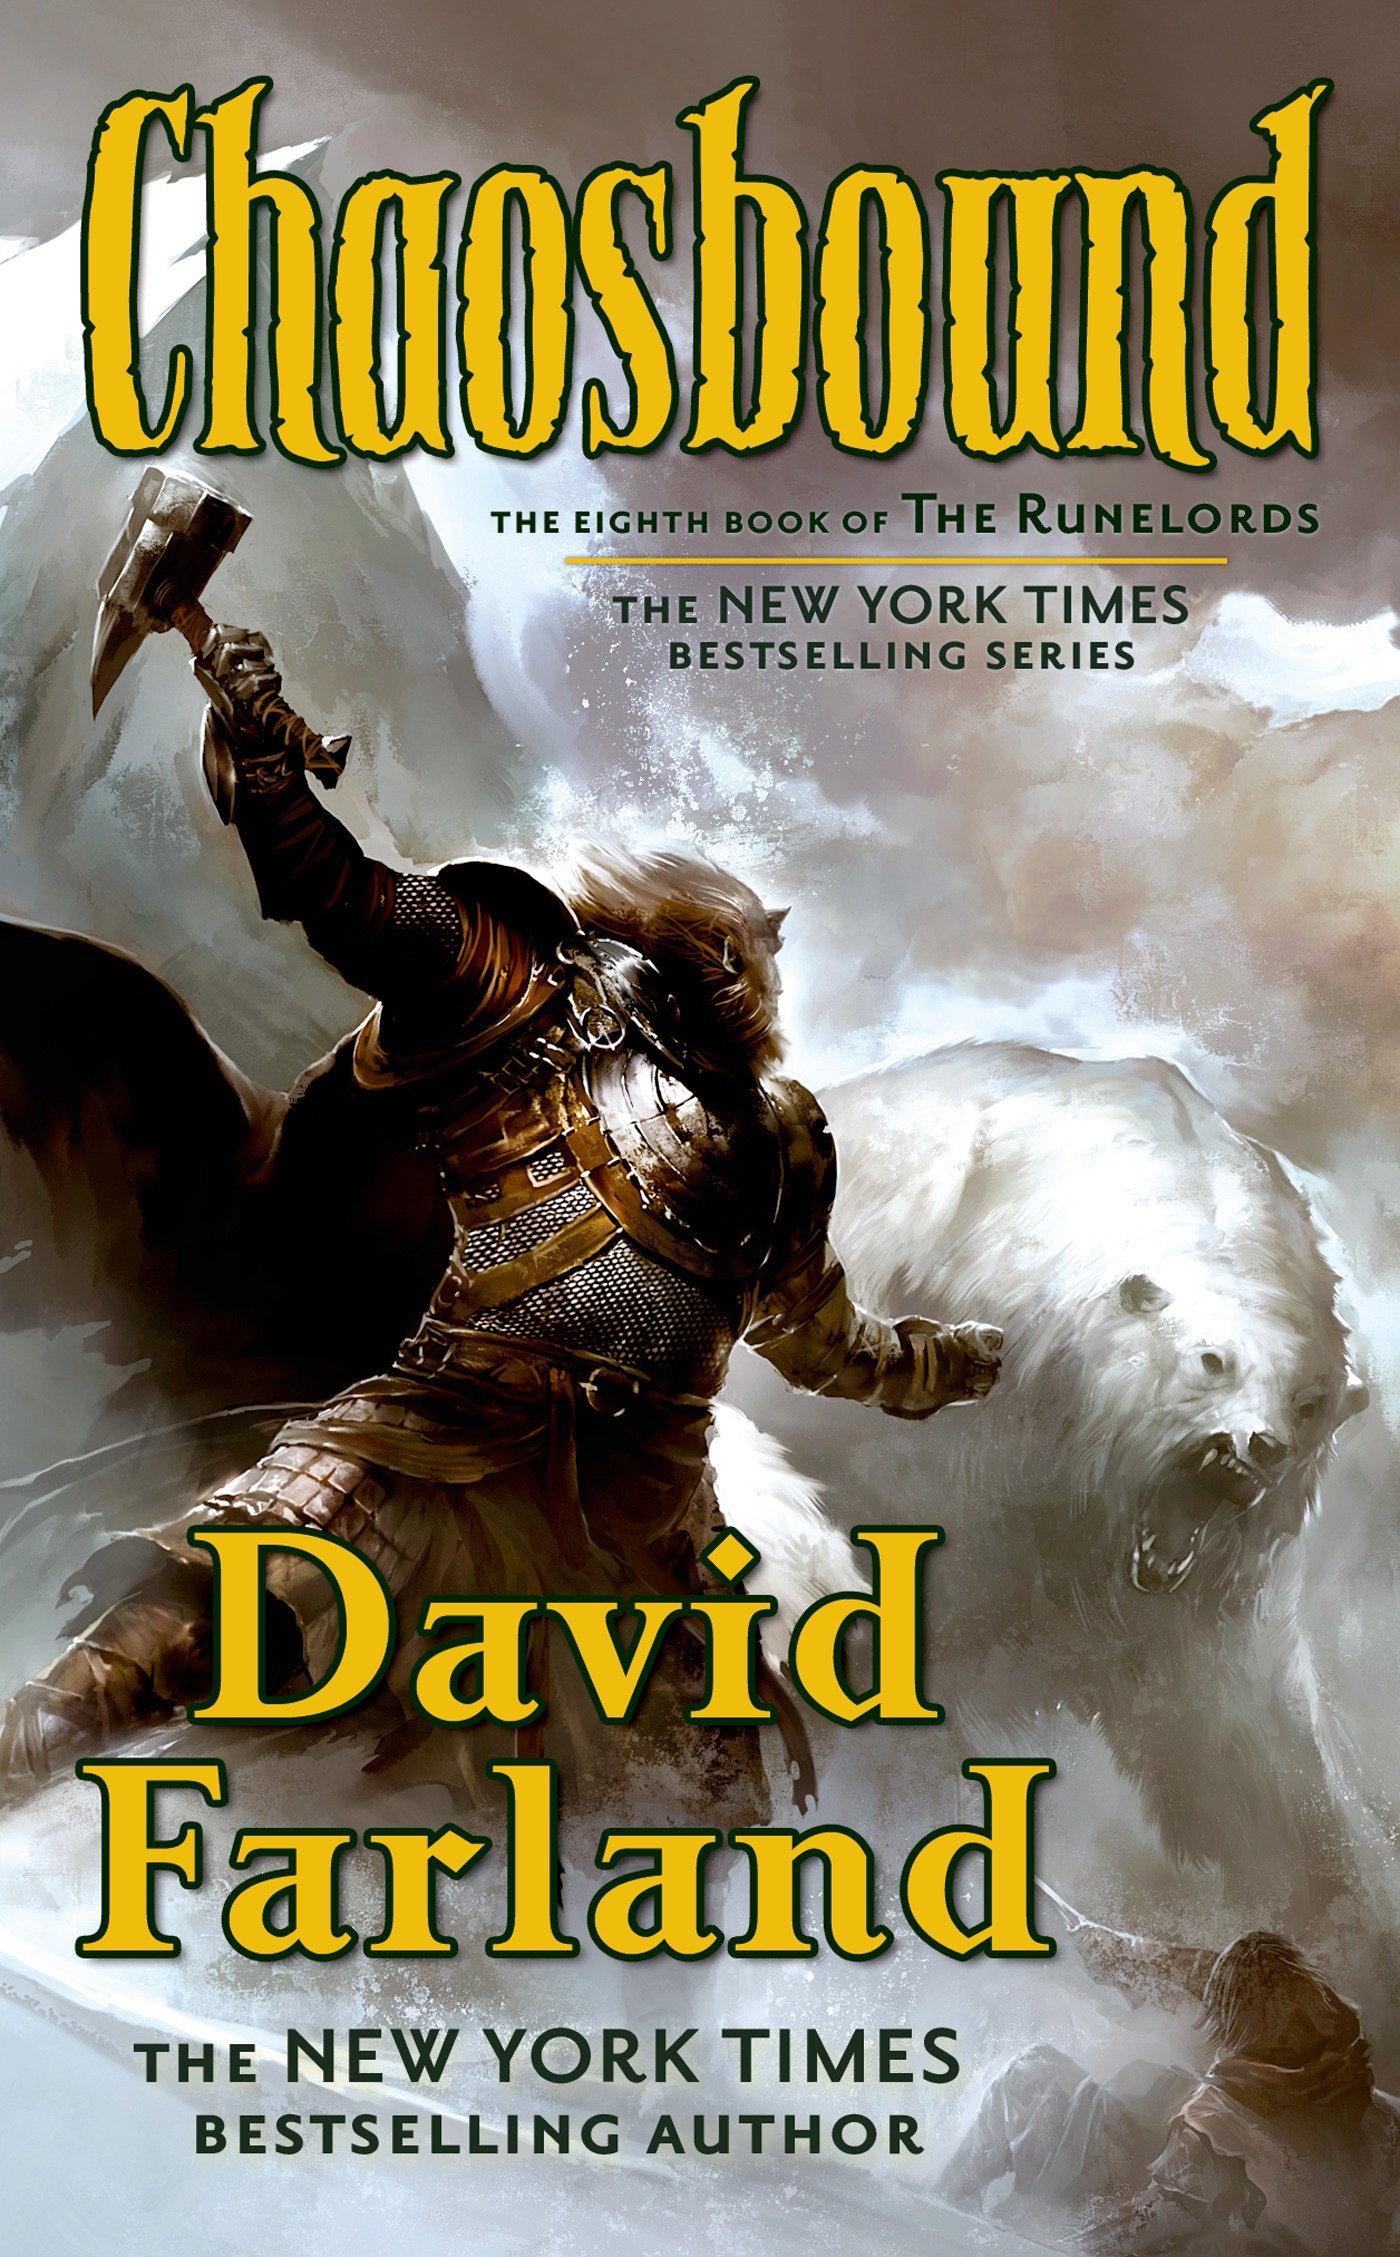 Chaosbound : The Eighth Book of the Runelords by David Farland